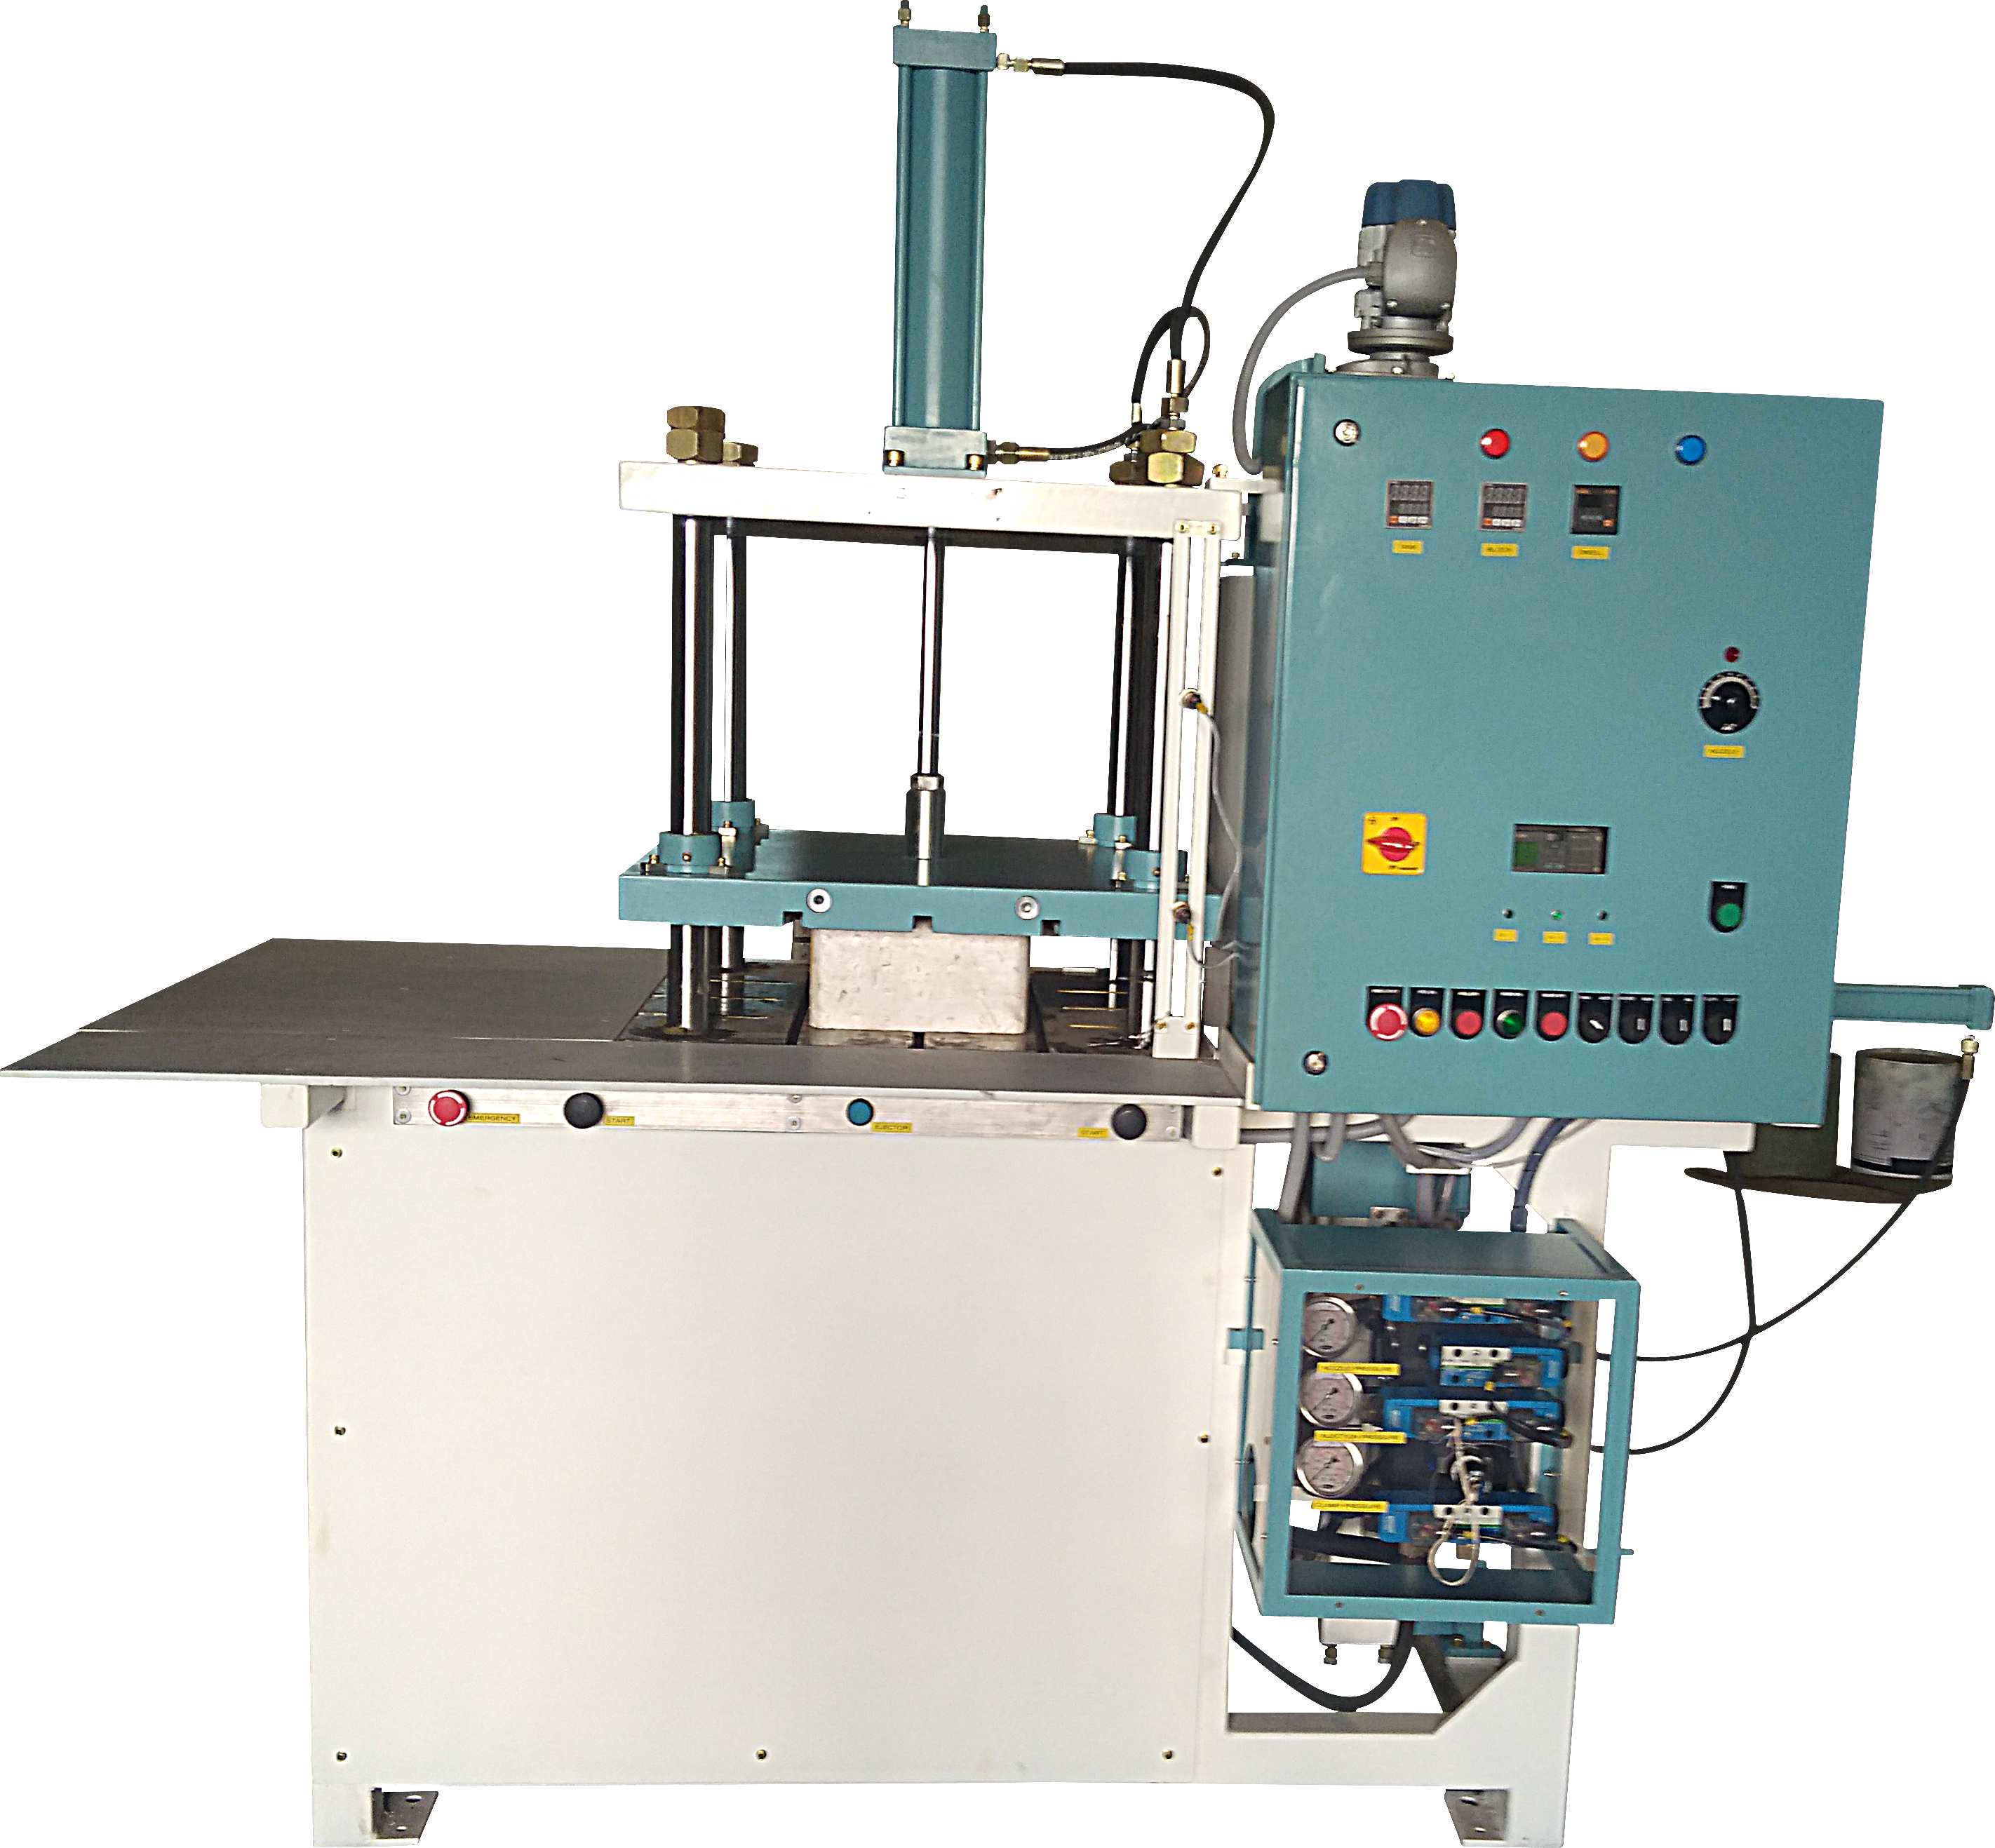 wax injection machines shell room melting furnace material testing lab  technocast 
 precicast  precitech  investcast steelcast